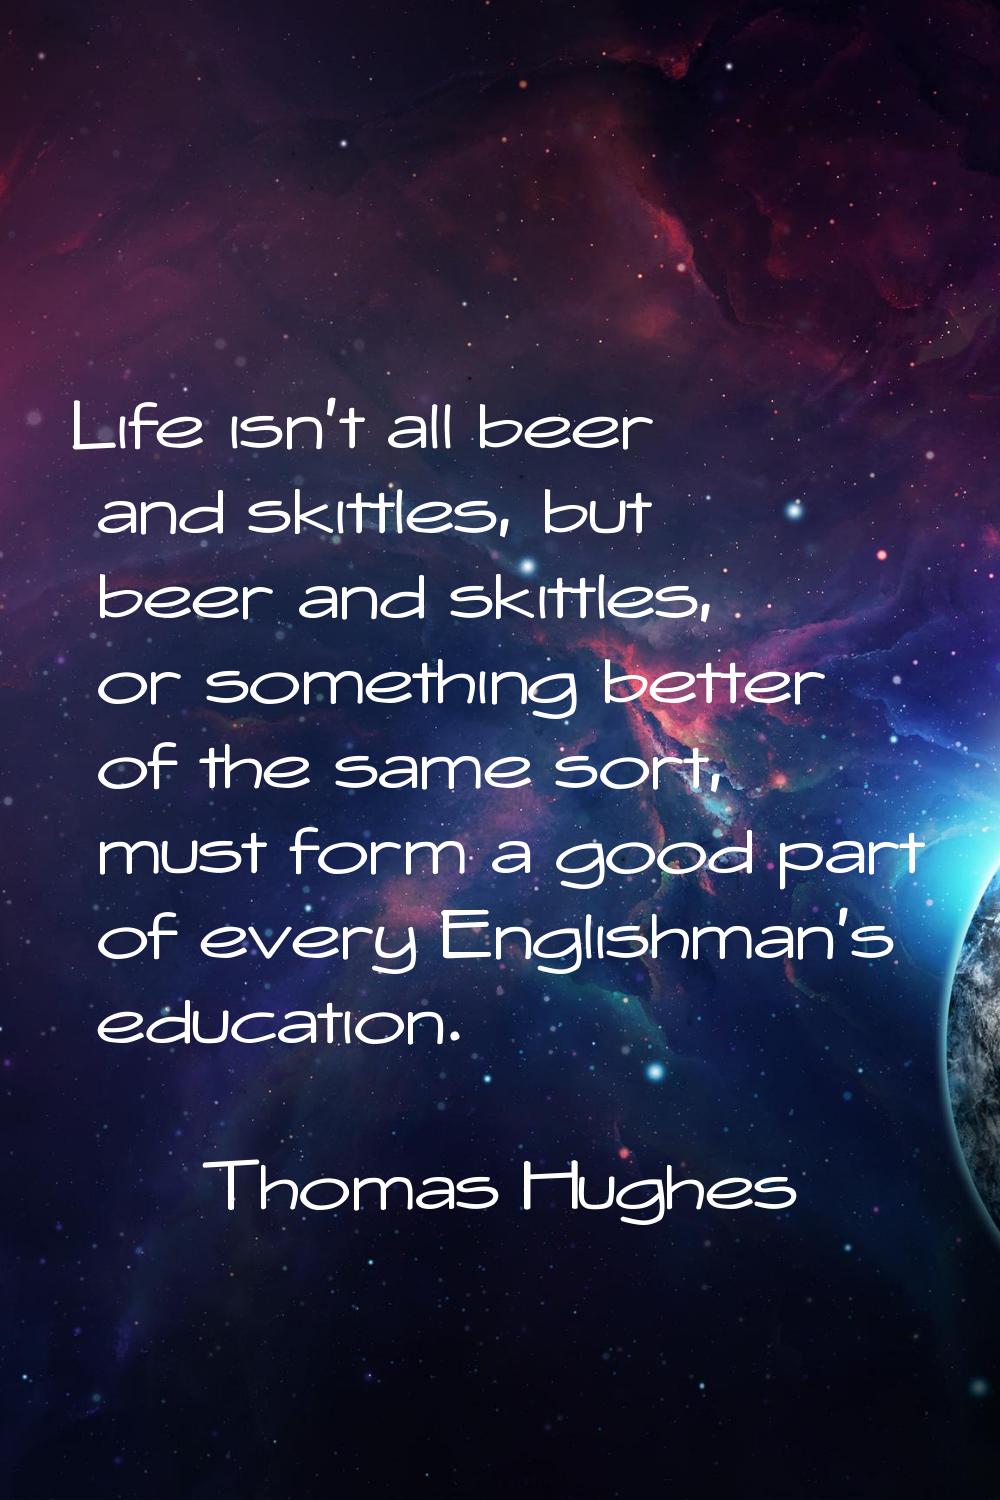 Life isn't all beer and skittles, but beer and skittles, or something better of the same sort, must